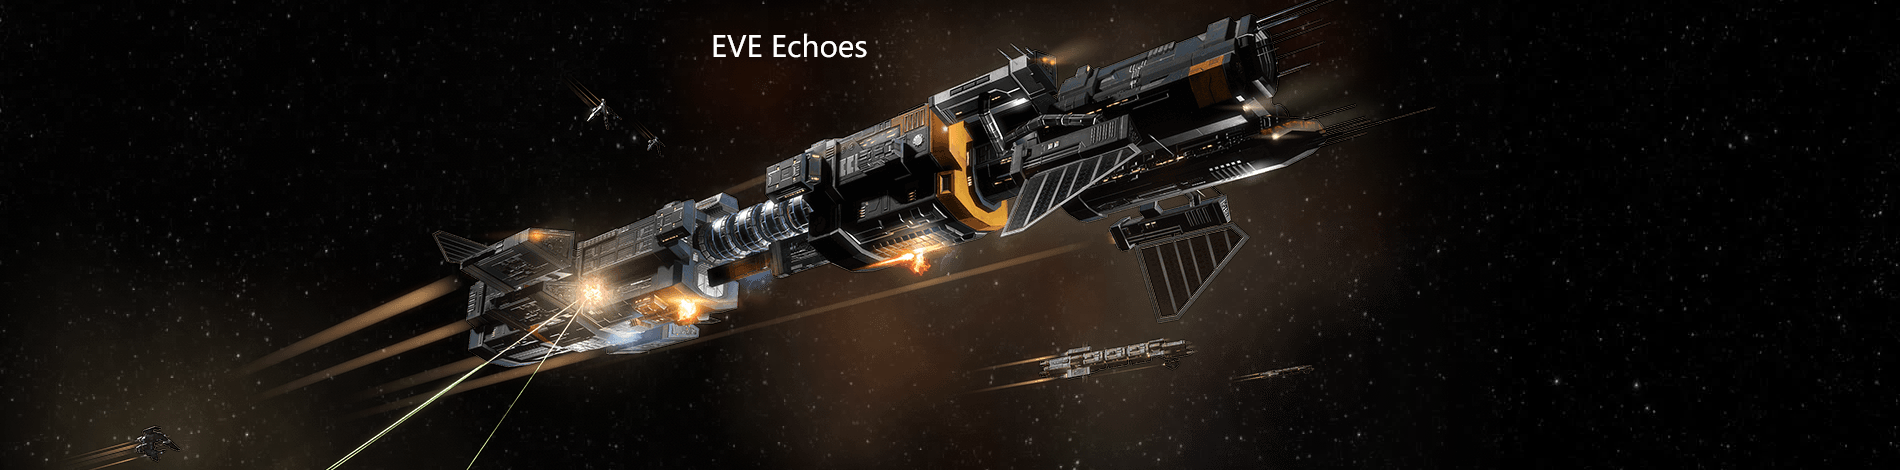 EVE Echoes ISK